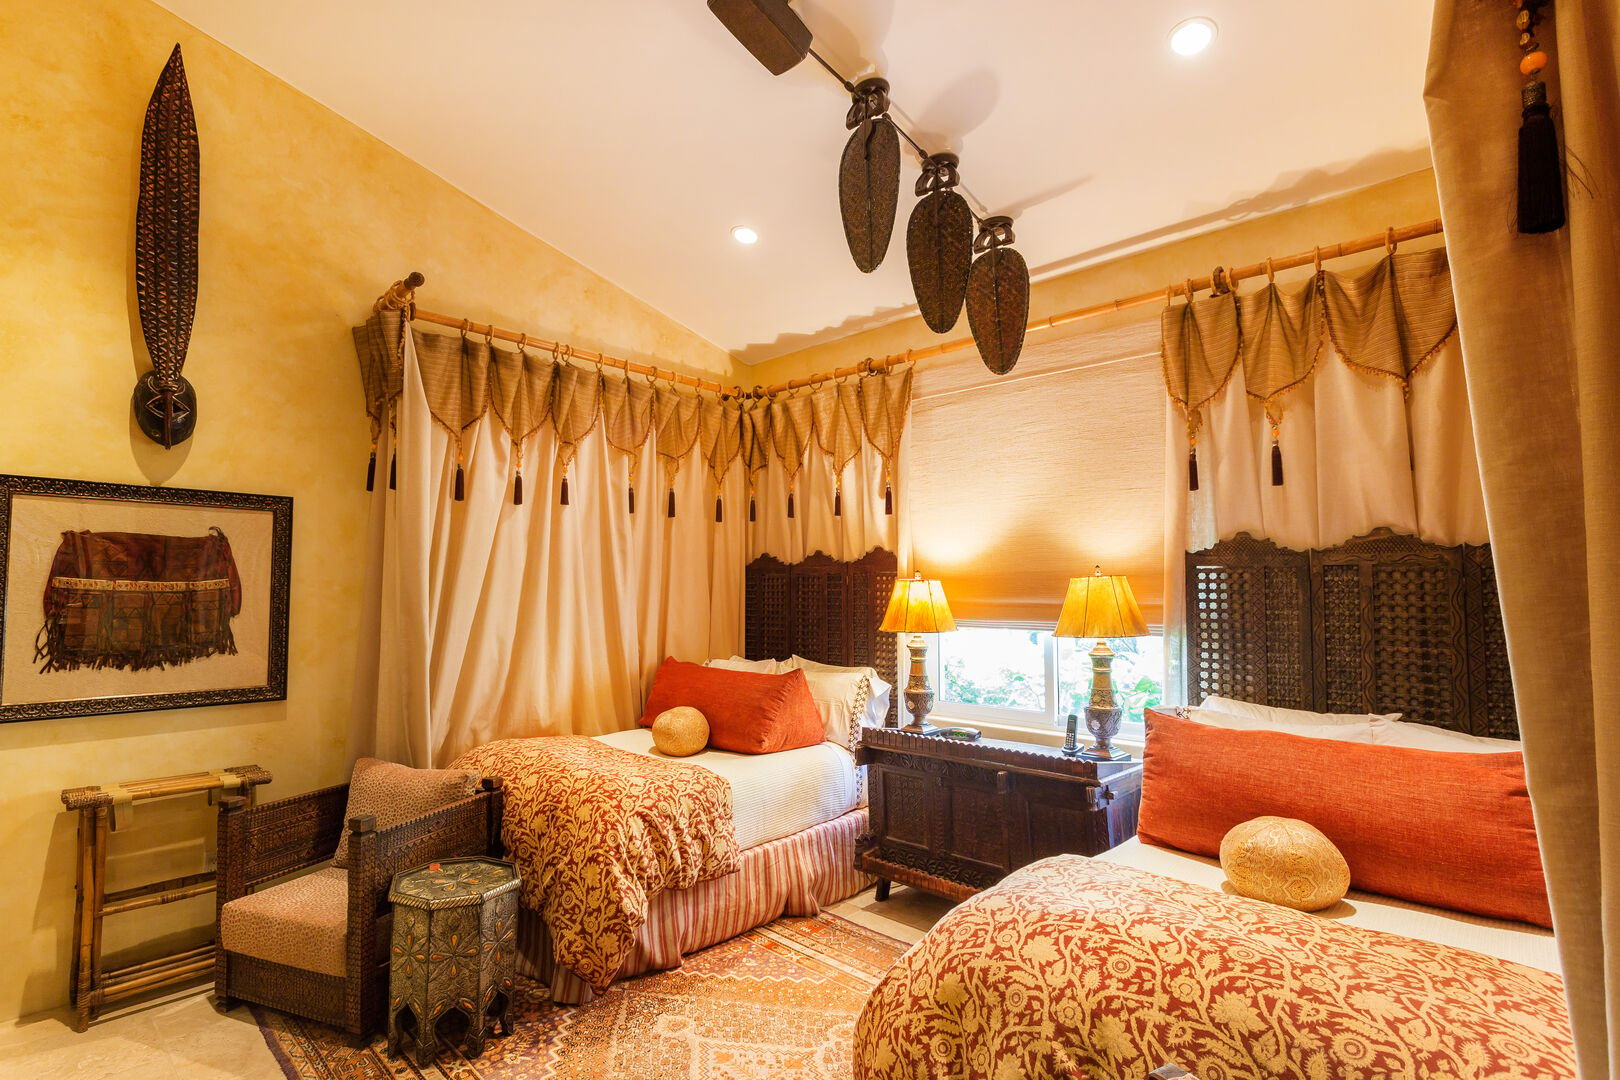 Bedroom with two beds, ceiling fan, nightstand, and table lamps